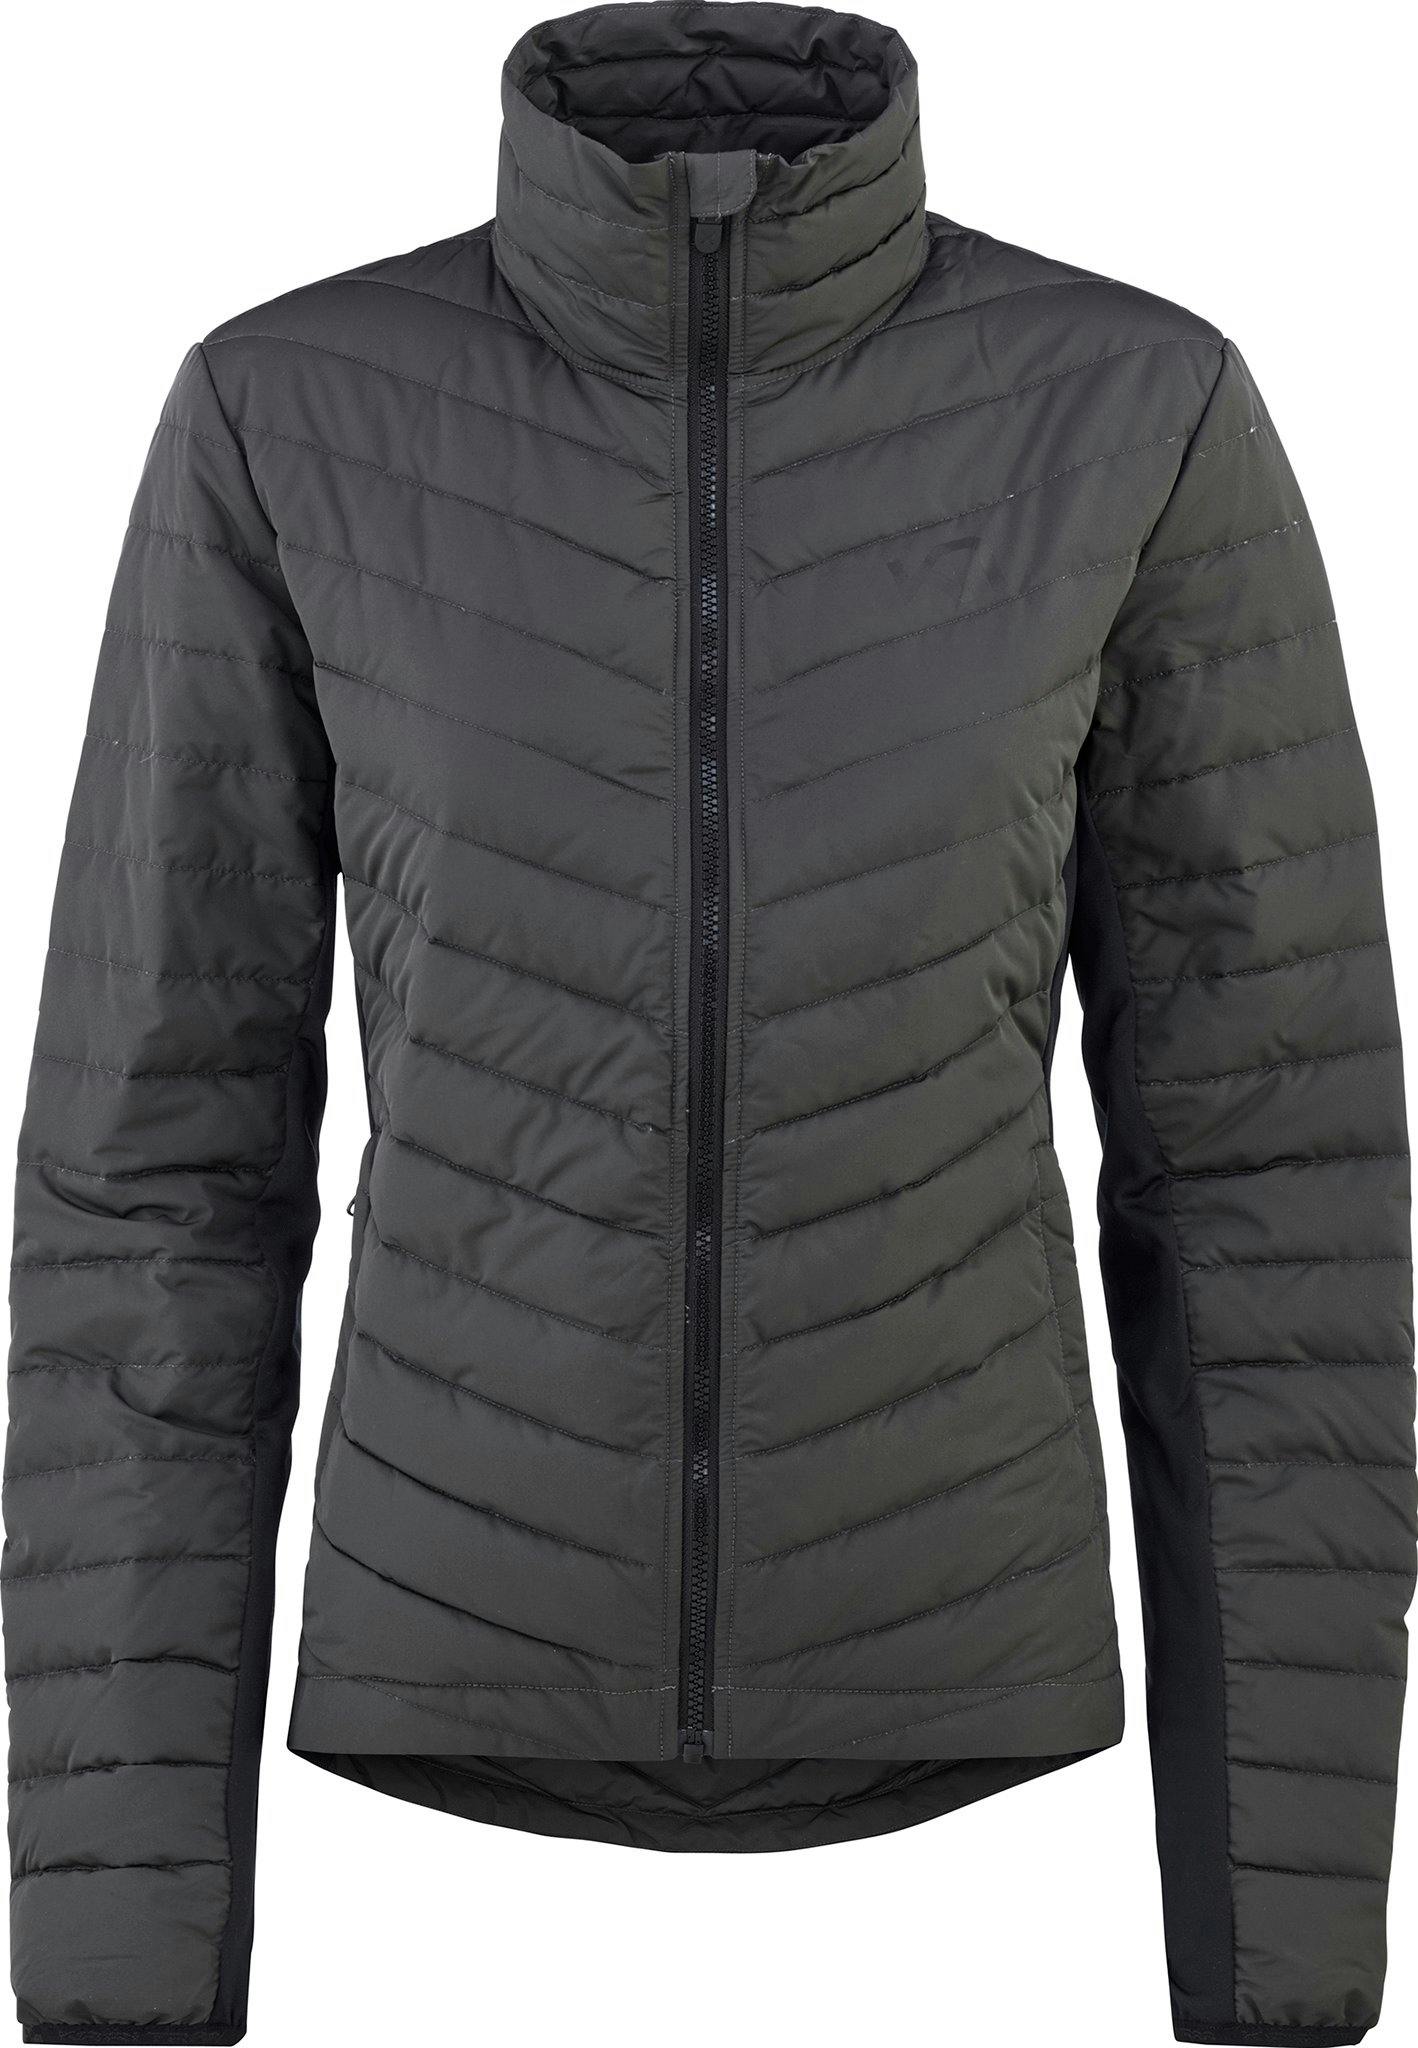 Product image for Eva Down Jacket - Women's